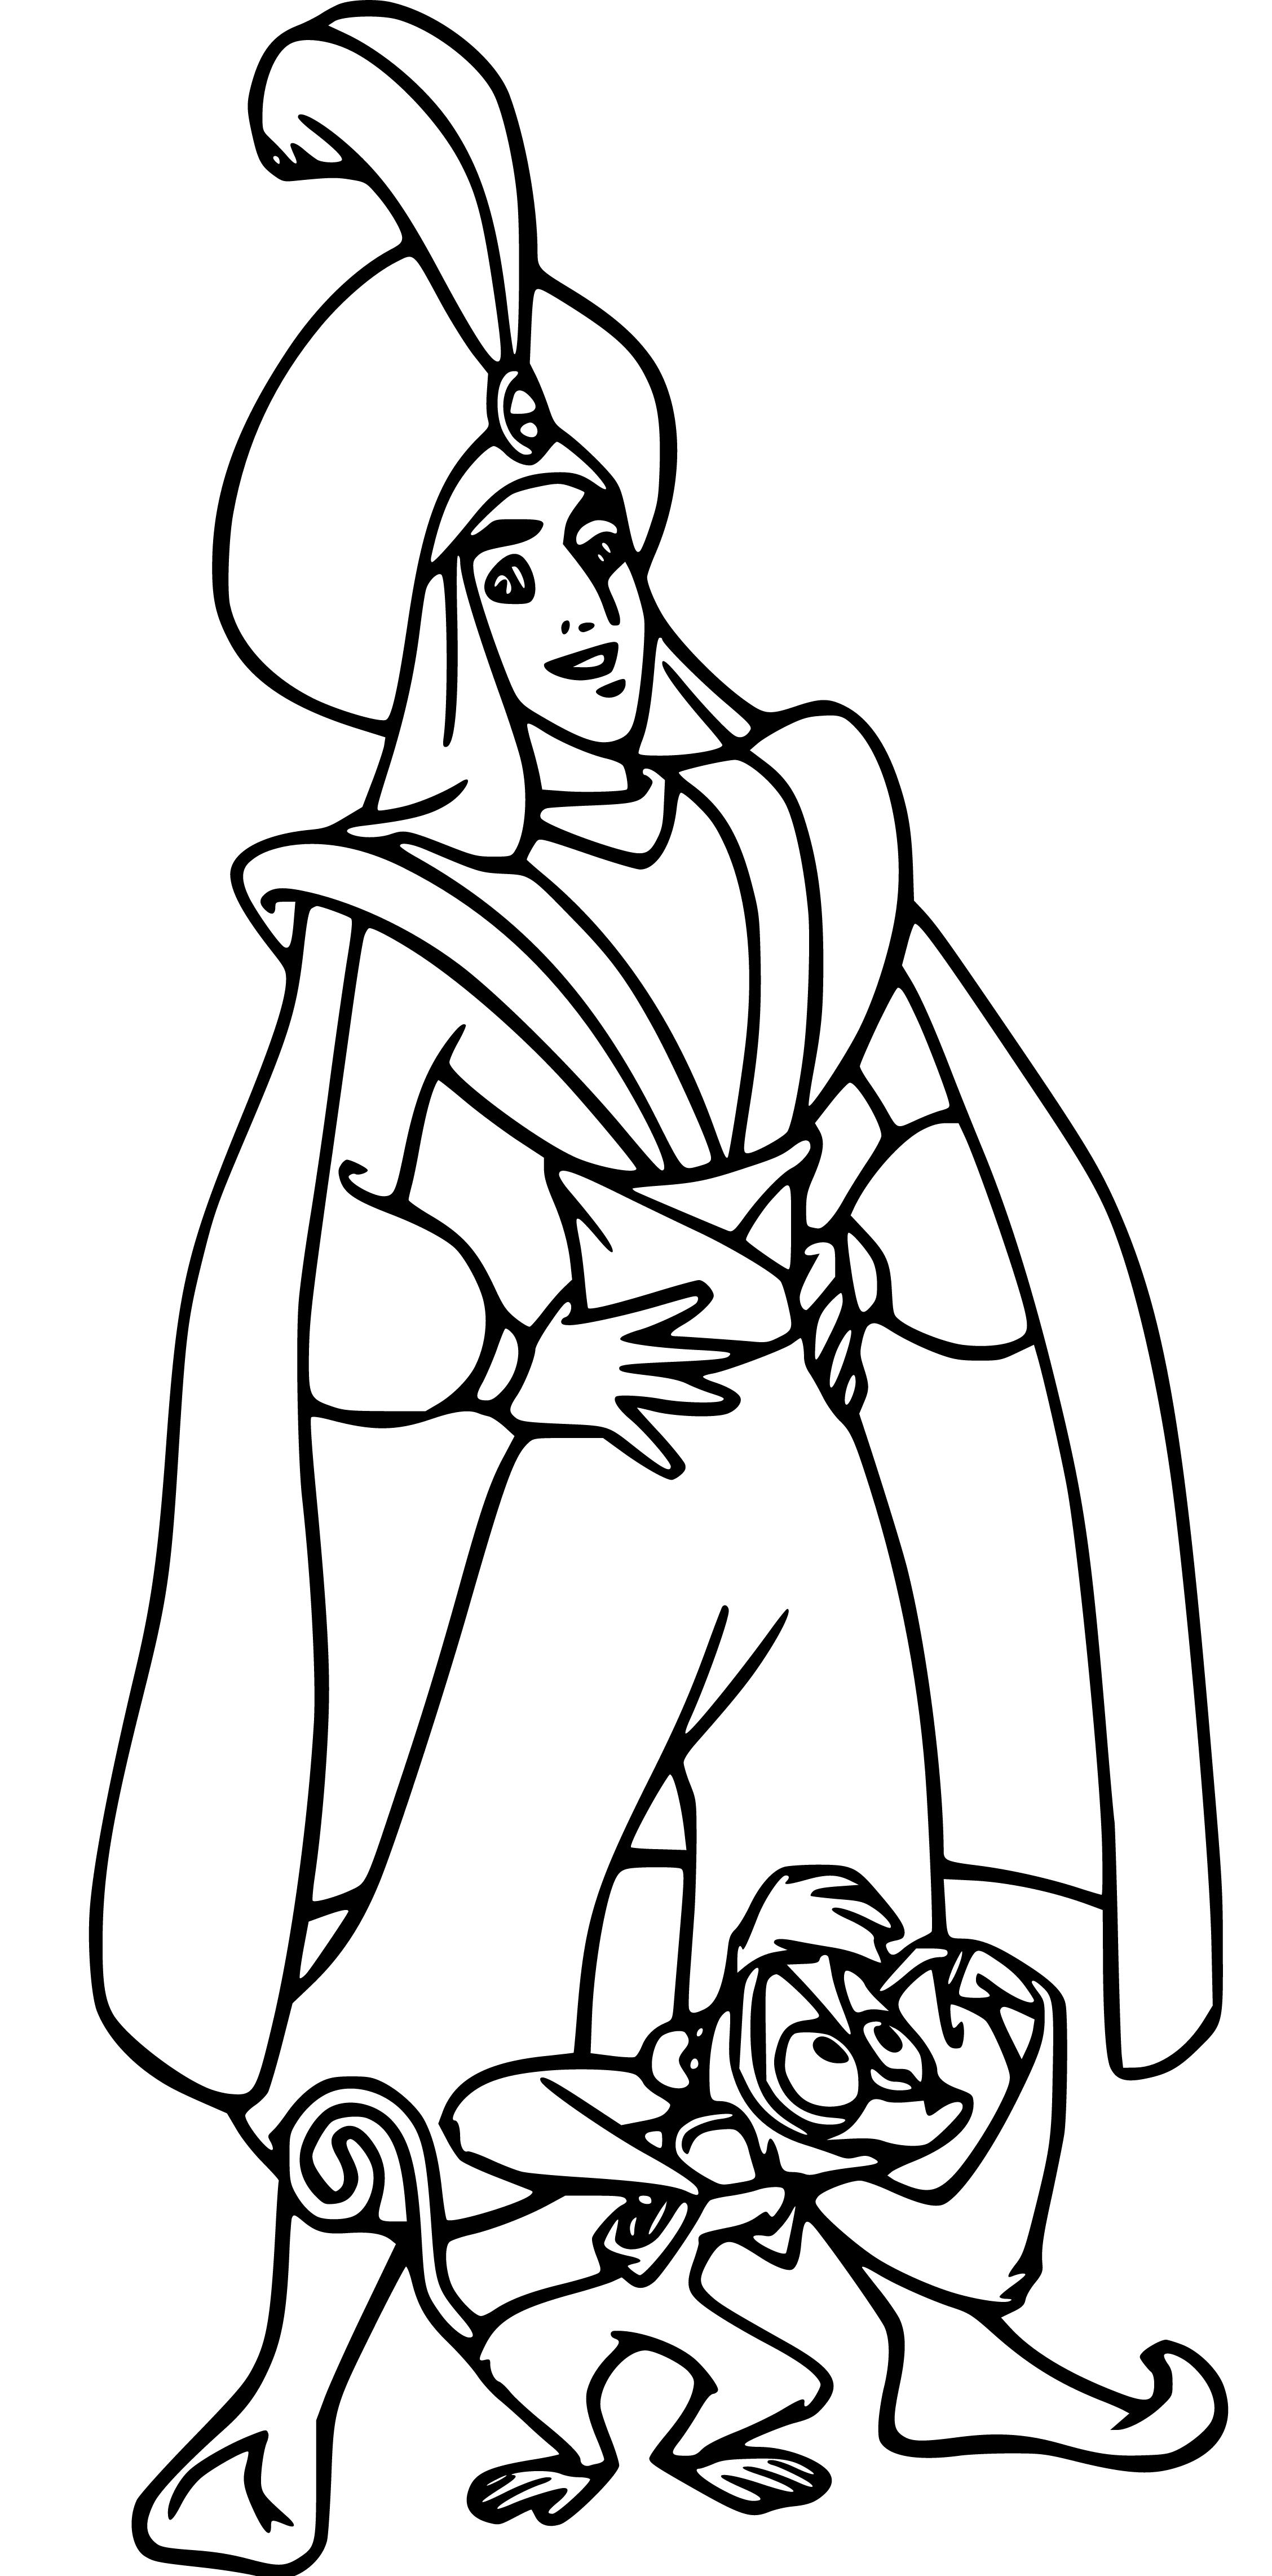 Simple Aladdin Coloring Page easy for kids - SheetalColor.com